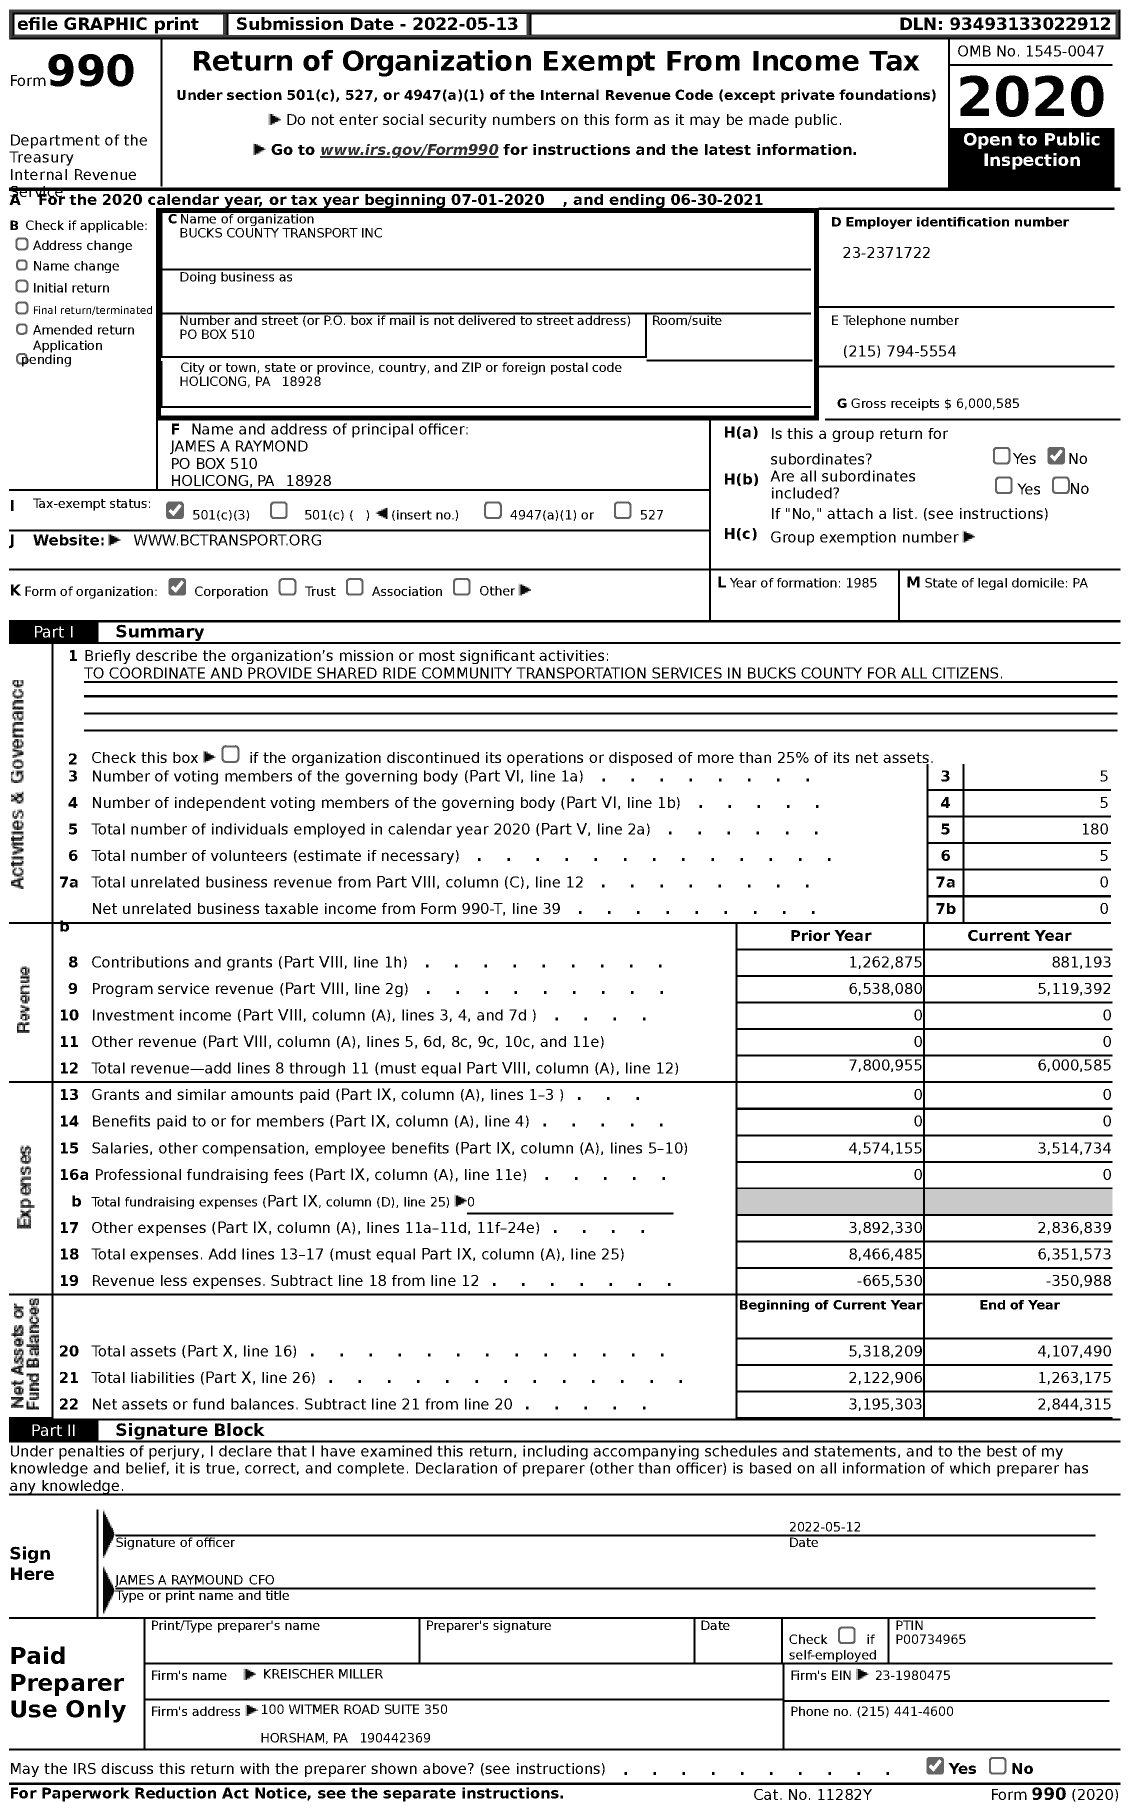 Image of first page of 2020 Form 990 for Bucks County Transport (BCT)